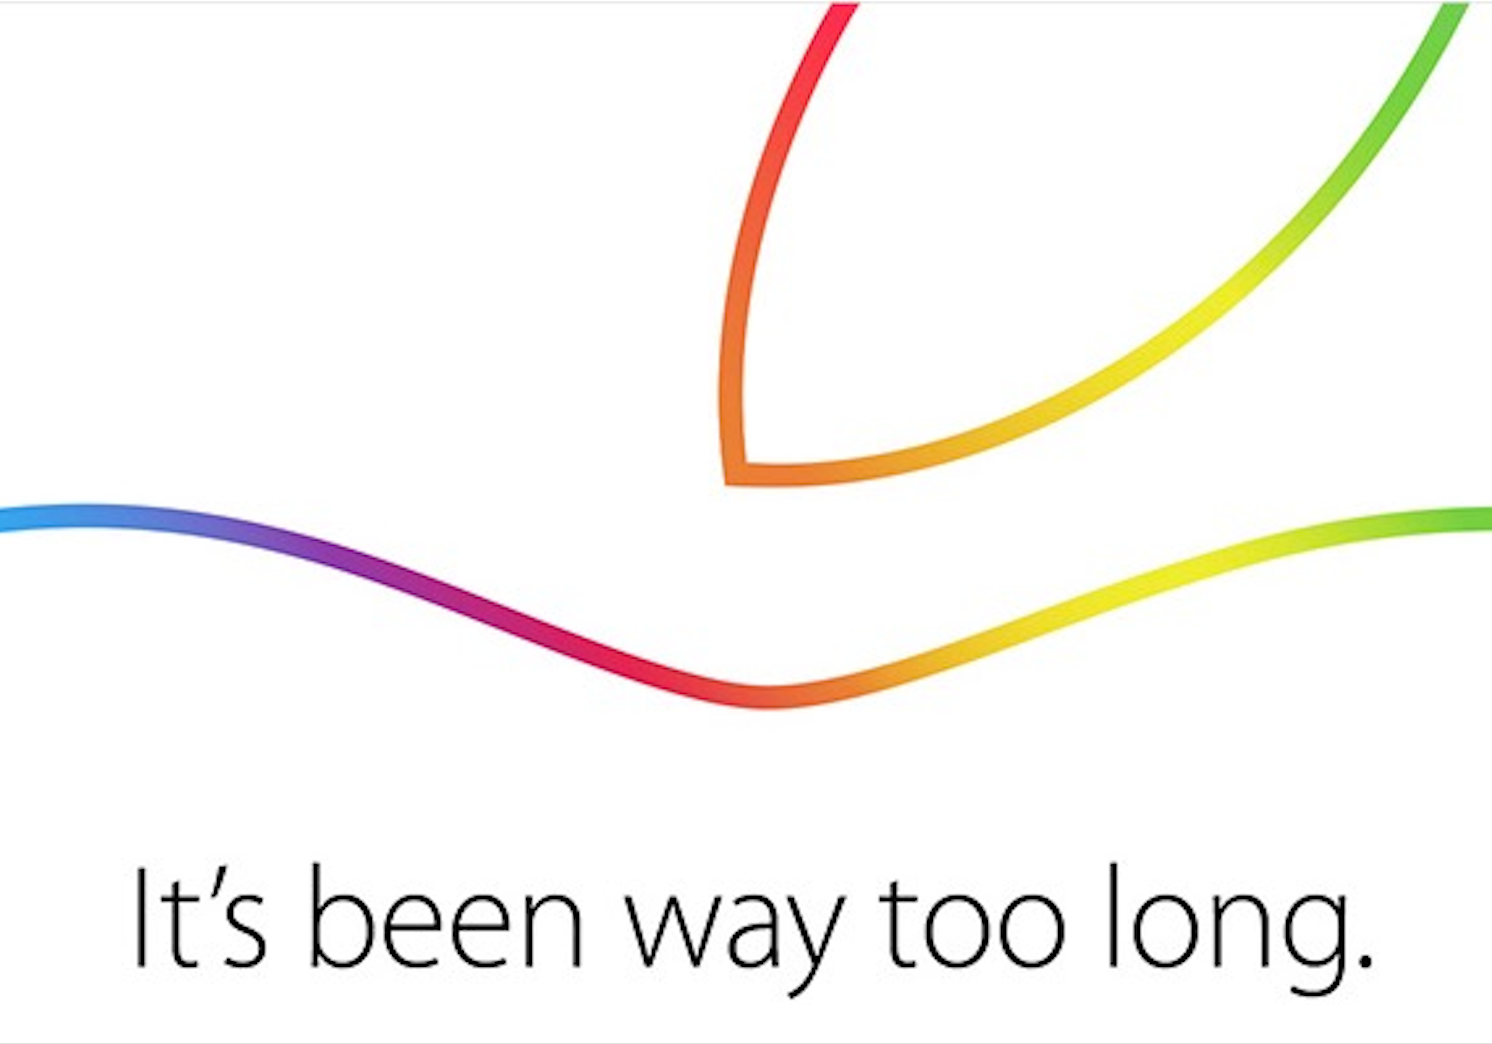 apple 16 october event rumour round up what can we expect to see image 5